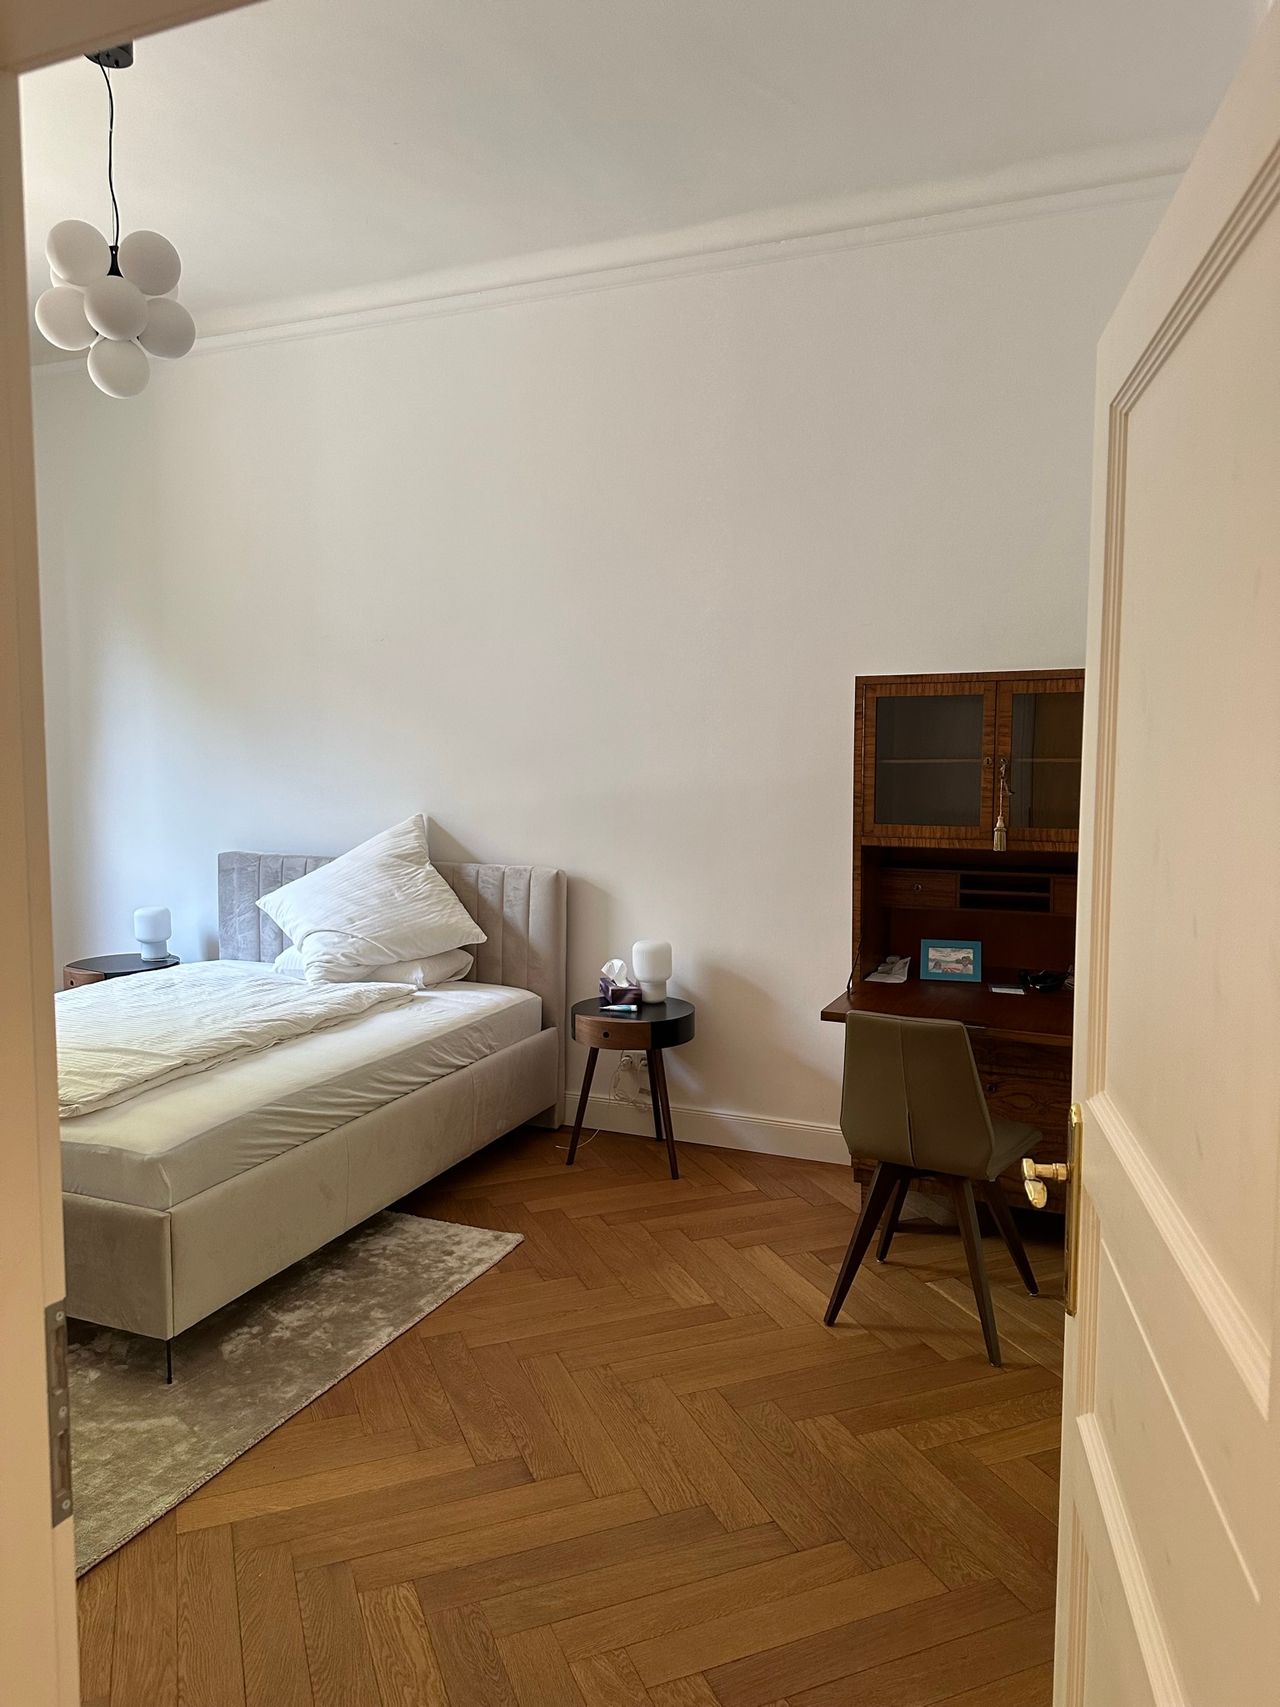 Fully furnished 2-room apartment in the heart of Frankfurt Nordend, Holzhausenviertel